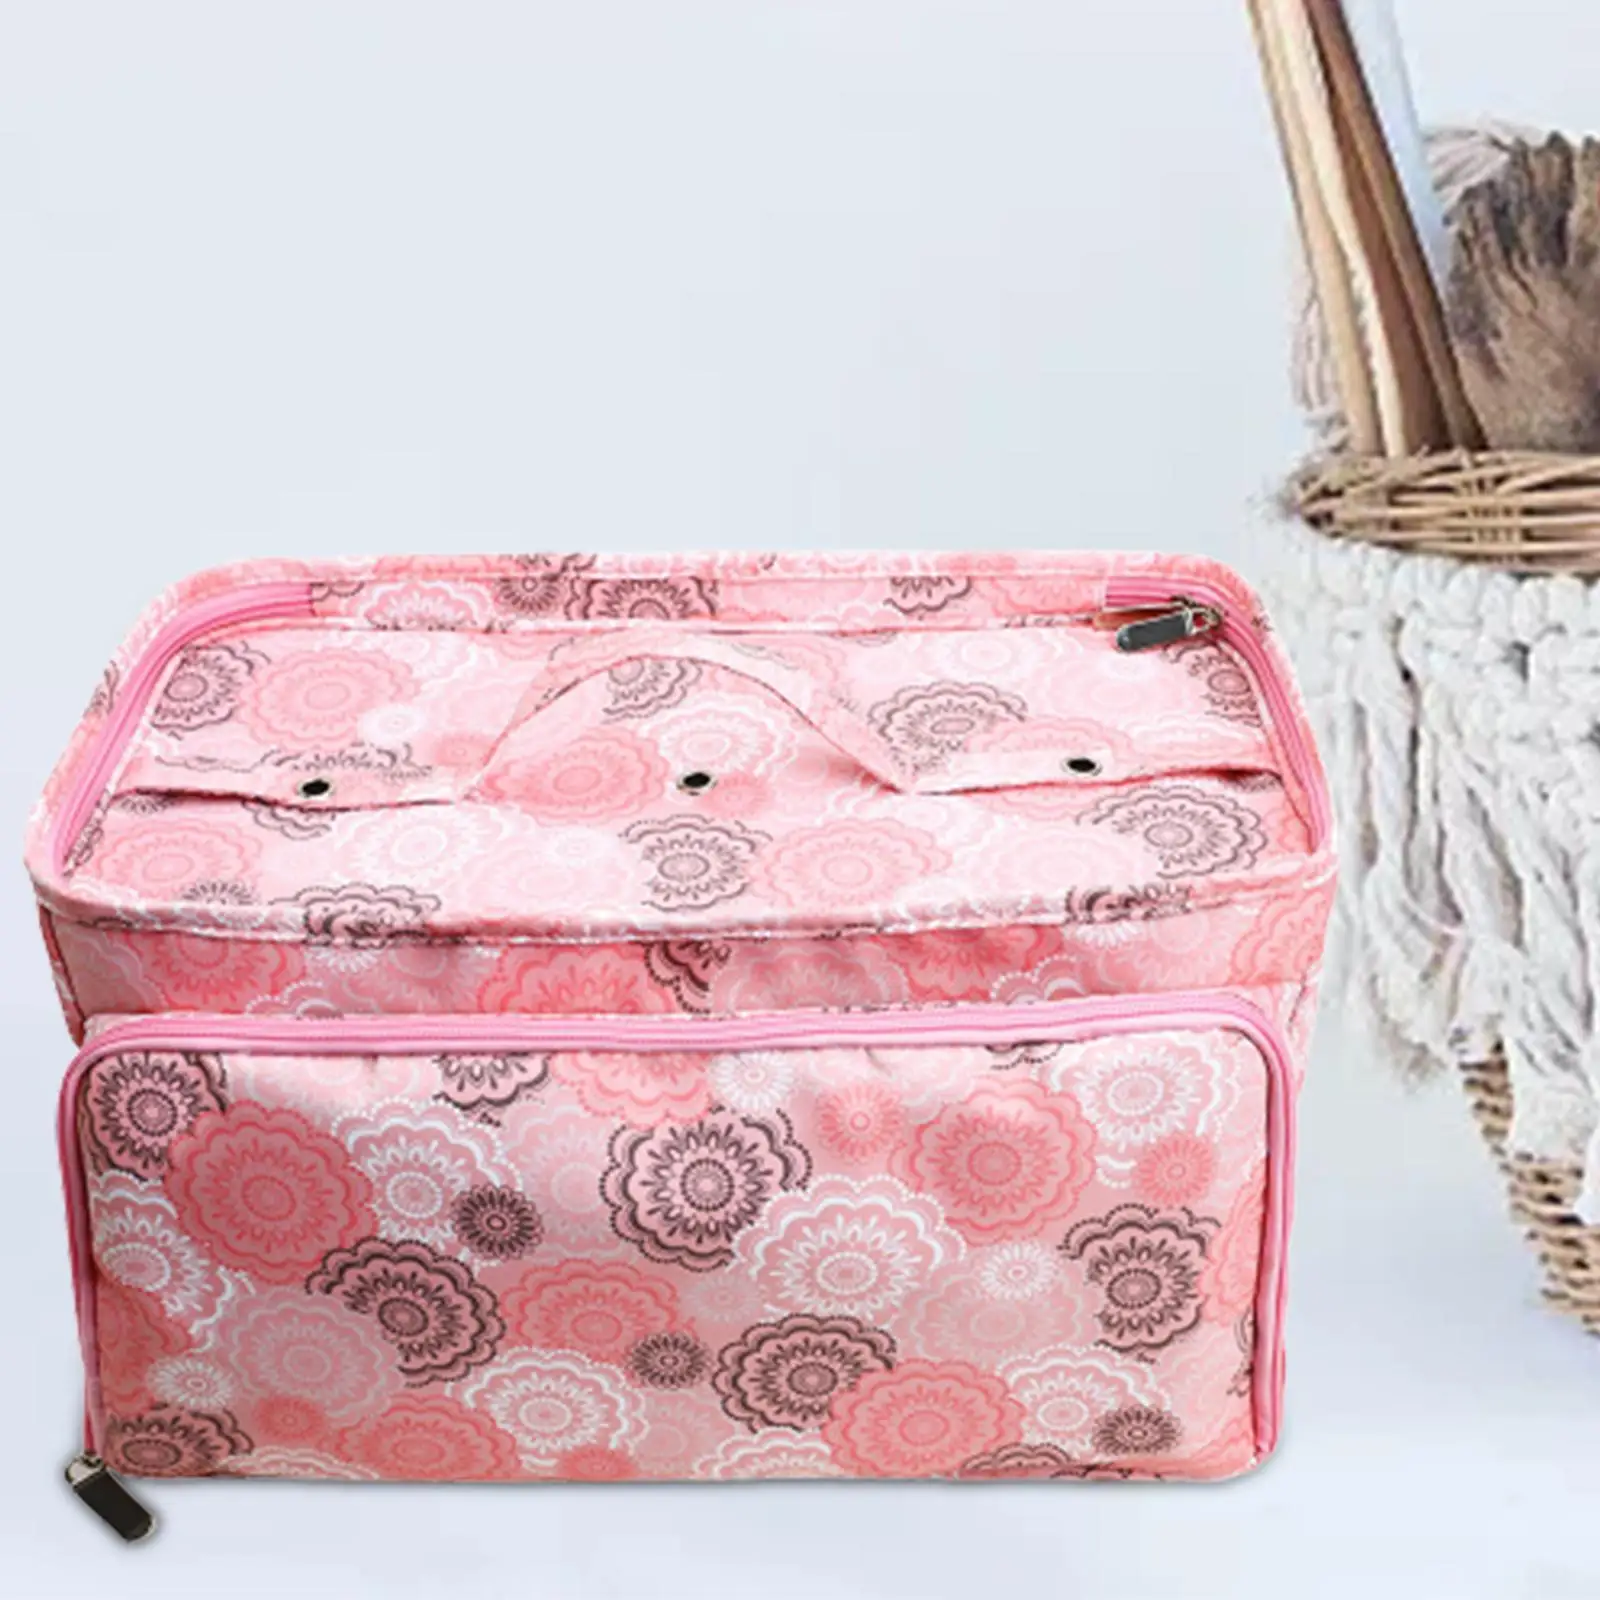 Yarn Storage Tote Bag Sewing Accessories Crochet Durable Sturdy Large Capacity with 3 Holes Multifunctional yarns Knitting Tote